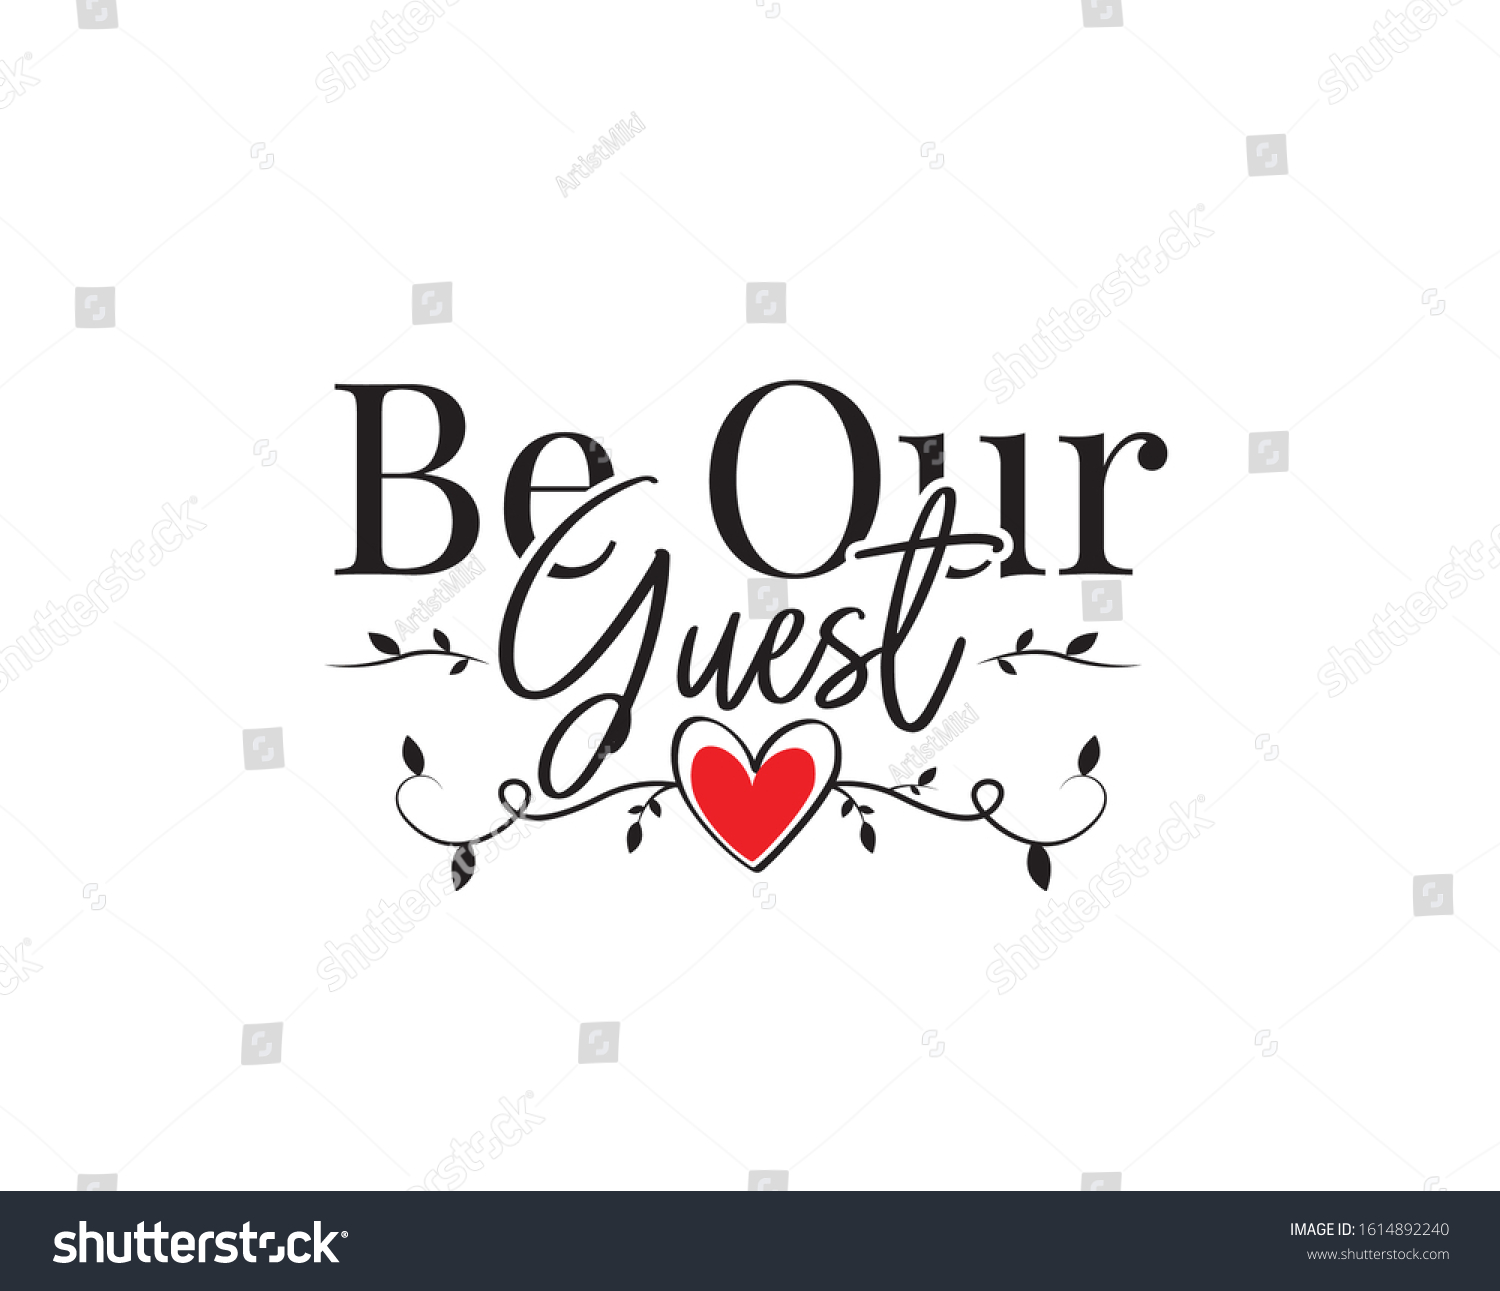 SVG of Be our guest, vector. Wording design, lettering. Wall art work, wall decals, home decor, poster design isolated on white background. Red heart illustration svg